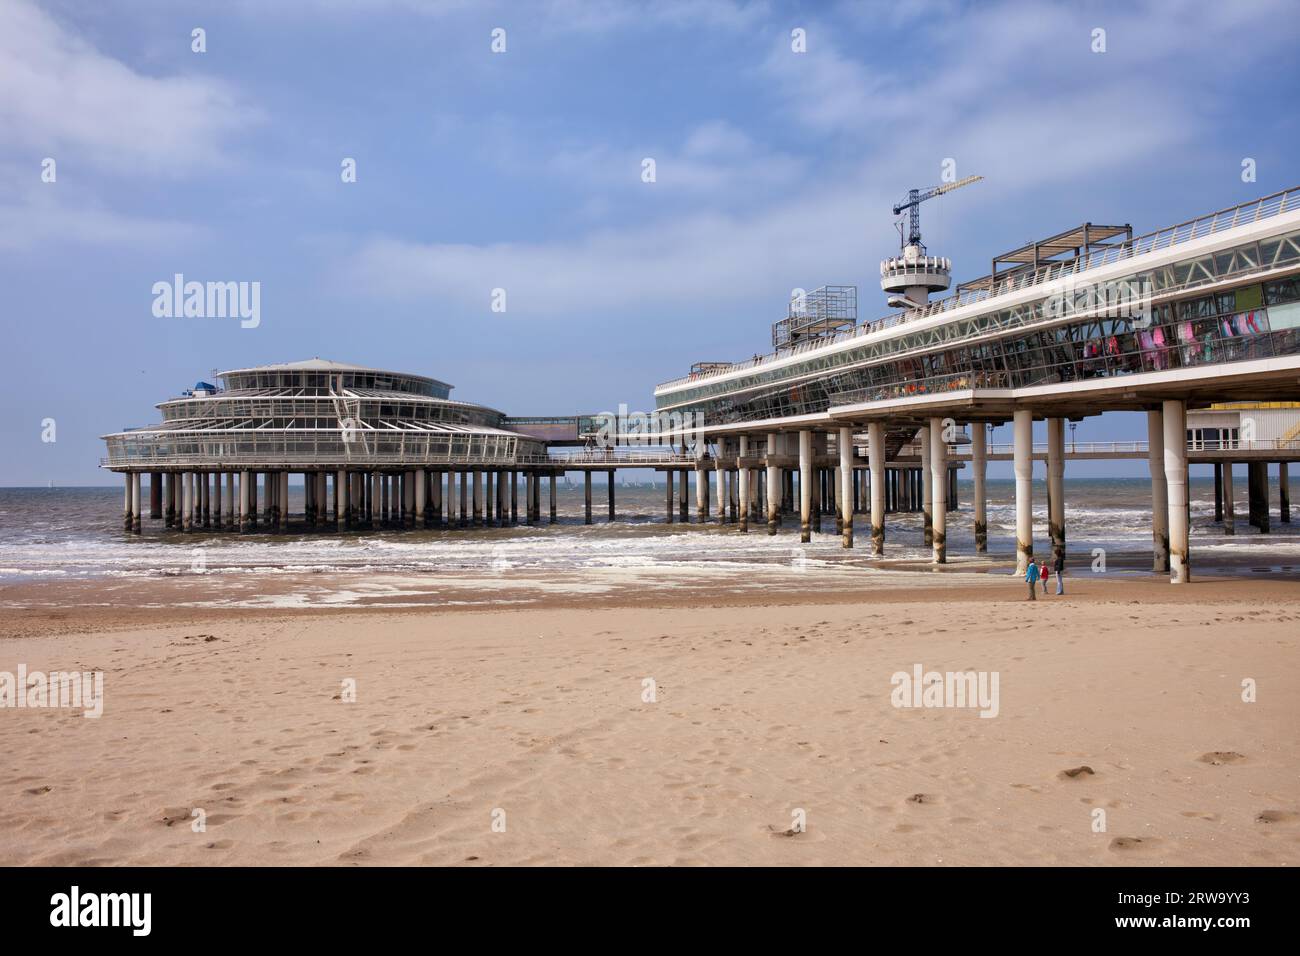 Scheveningen beach and pier by the North Sea in The Hague (Den Haag), South Holland, the Netherlands Stock Photo